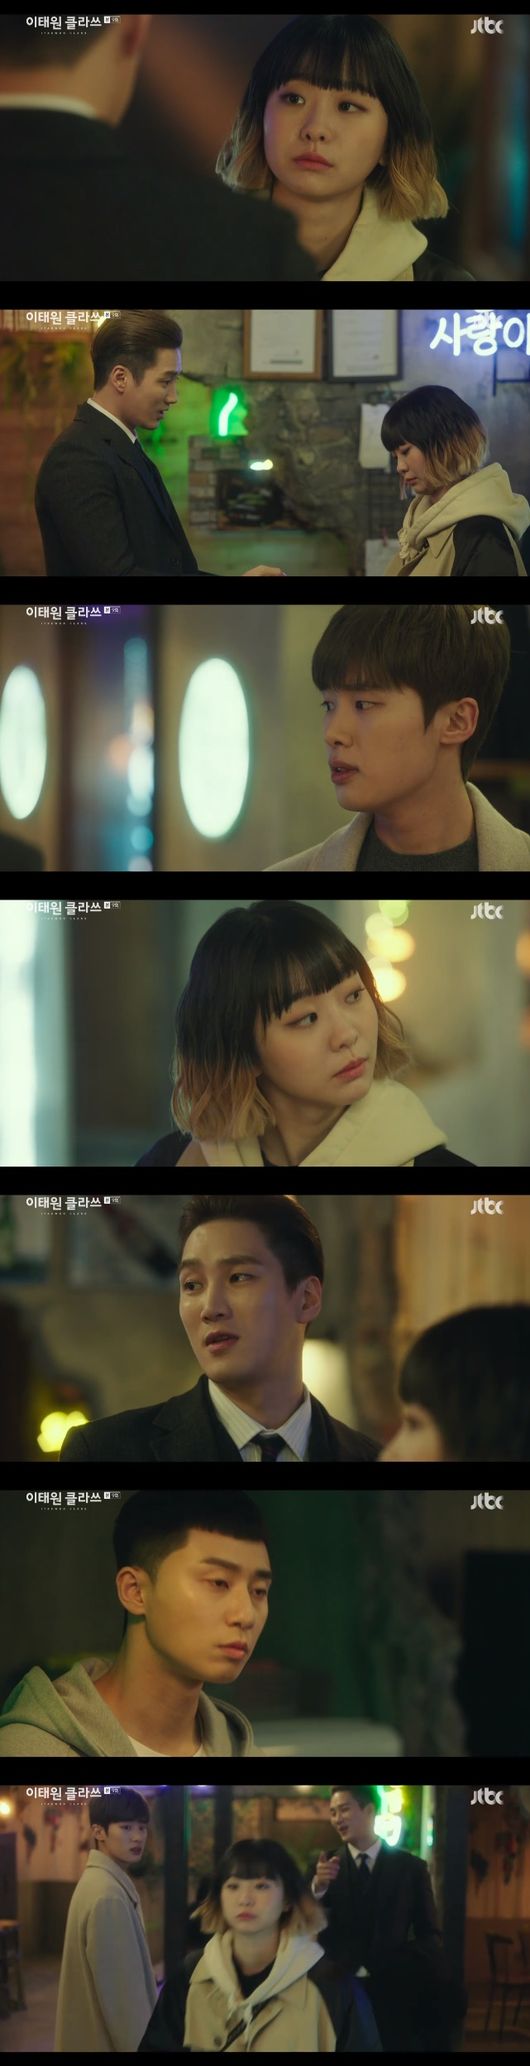 Kim Da-mi solidified his mind toward Park Seo-joon in Itaewon ClassIn JTBCs Itaewon Class broadcast on the afternoon of the 28th (playplayed by Gwangjin director Kim Sung-yoon), Ahn Jang Dae-hee (played by Yoo Jae-myung) came out to the scout, where Joy Seo (played by Kim Da-mi) is the core of the Jangga.At the Janga seminar, Chang asked Joyser what he thought about the story of business is a person, and Chang, who passed the question with the word it is a romantic story, remembers that Joyser worked at night and brings Joyser back to the presidency.When asked if he had eaten, would he start eating? asked Joy. The Fountainhead confirmed Joy and frowned.Two people at a fine restaurant alone, and when he comes to the house, he says he will refuse to let him do it.We cant do that because of our president is Joy.I do not think it is important to have friends these days, but it is a thin one. Do not be swept away by the well, but is not your proposal because of our boss?If you see me, not our president, in that proposal, please suggest it again. The Fountainhead came out to make a scout offer directly from Joy.Knotweed water, where the Fountainhead is sitting at night and his face is hardened.Im gonna talk to you for a second, said Joy, who left the store with Jean The Fountainhead. Im here to scout.This is a lot of fun and shopping, the Fountainhead.Seo-yool Lee has to choose because it is a life of Seo-yool Lee, said Park, who has a bustling Choi Seung-kwon and Knotweed water.Choi Seung-kwon, who has to pay for it, has to catch it unconditionally. Knotweed water asked Roy if he was anxious.Knotweed water asked Park what Joy was just about employees or employees.Jean said to Joy, This is not easy for a high school graduate.Thats a good offer, said Joy. The Fountainhead said, Its not okay.I have a stake in the night, so I get a lot more than the salary I offered, Joy said.The Fountainhead made twenty-five thousand Jessie when he said that he could go for two hundred million a year.I also quit right away if I didnt have a stake in how tired I was of the stuffiness of Roy, he said.Joy then said he would save the phone number of the Fountainhead, naturally talking about the hit-and-run incident of the Fountainhead, Are you on the law?The Fountainhead, who confessed to all the events of the day, said, Stop it now. Joy, who tells me the recorded file.To The Fountainhead, who asks, What are you doing?, Joyce says, I like my boss like crazy, but in his head, its all your guts.So if Im gonna take it, you guys have to go. You guys will destroy it all.In the following trailer, the dismissal of the CEO was mentioned in the Changga, and Jang Dae-hee replied, Do not ask me to abandon my person again at the end of The Fountainhead should be abandoned.JTBC Itaewon Class captures broadcast screen